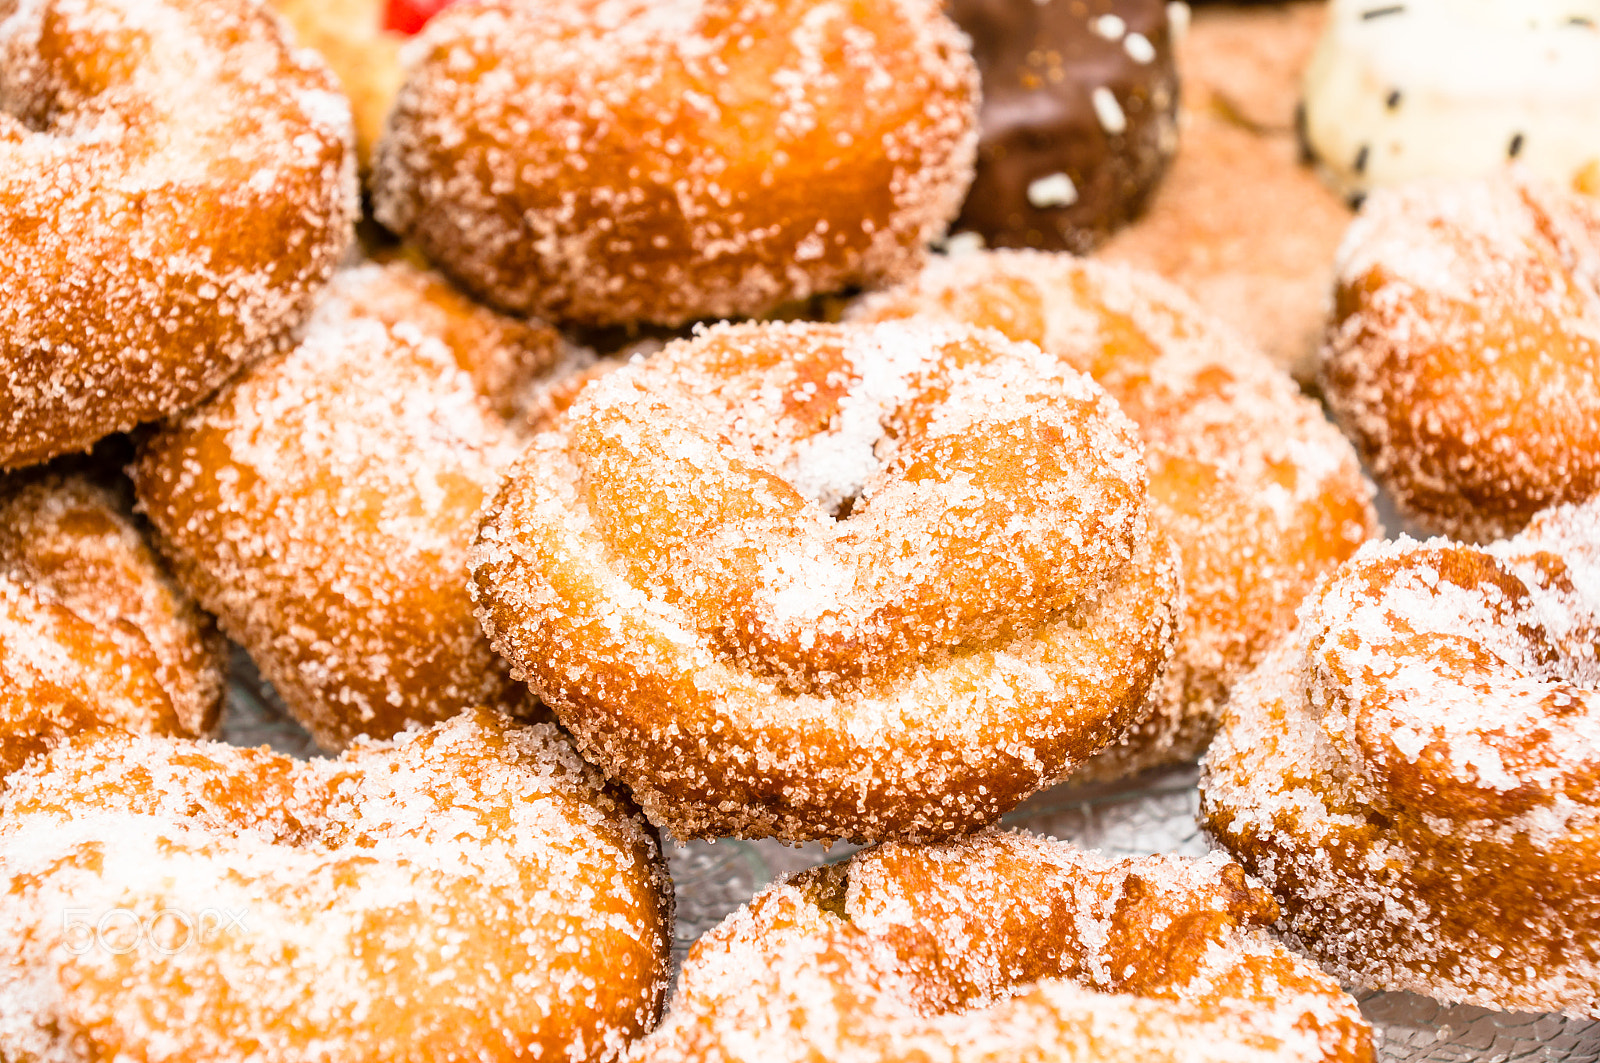 Sony SLT-A57 + Sony DT 16-105mm F3.5-5.6 sample photo. Closeup of rosquillas, typical spanish donuts photography